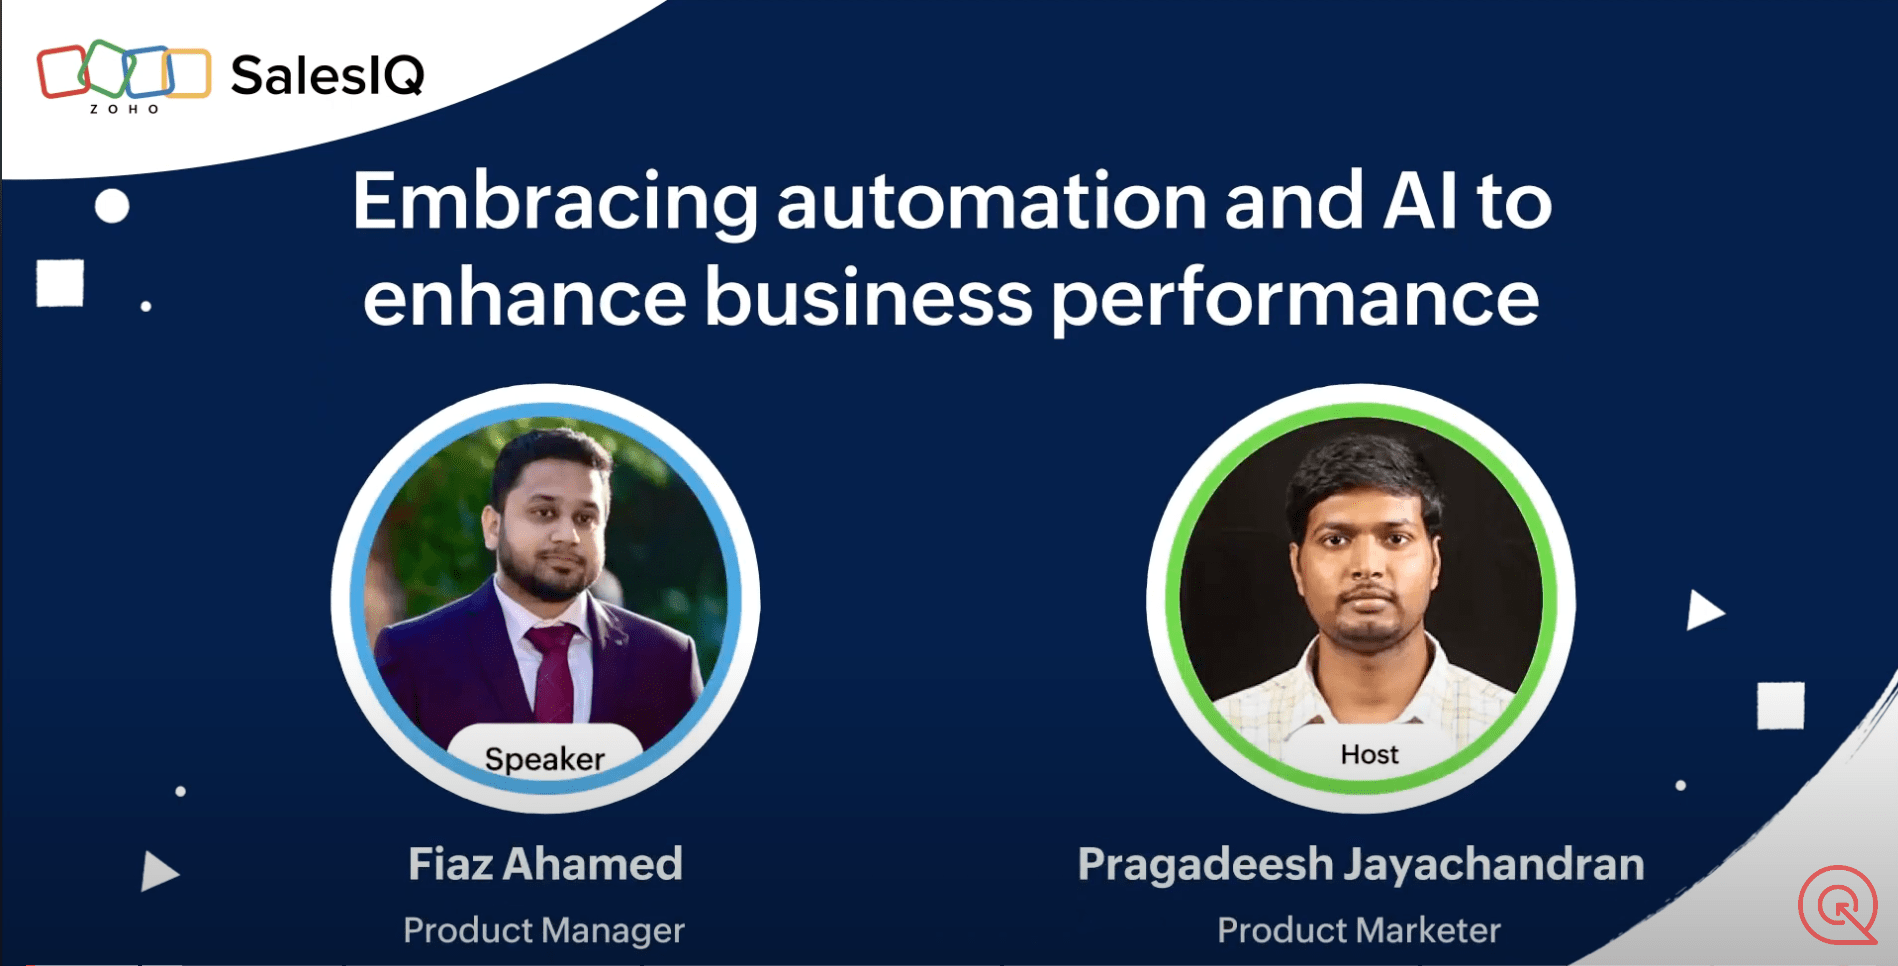 Embracing automation and AI to enhance business performance